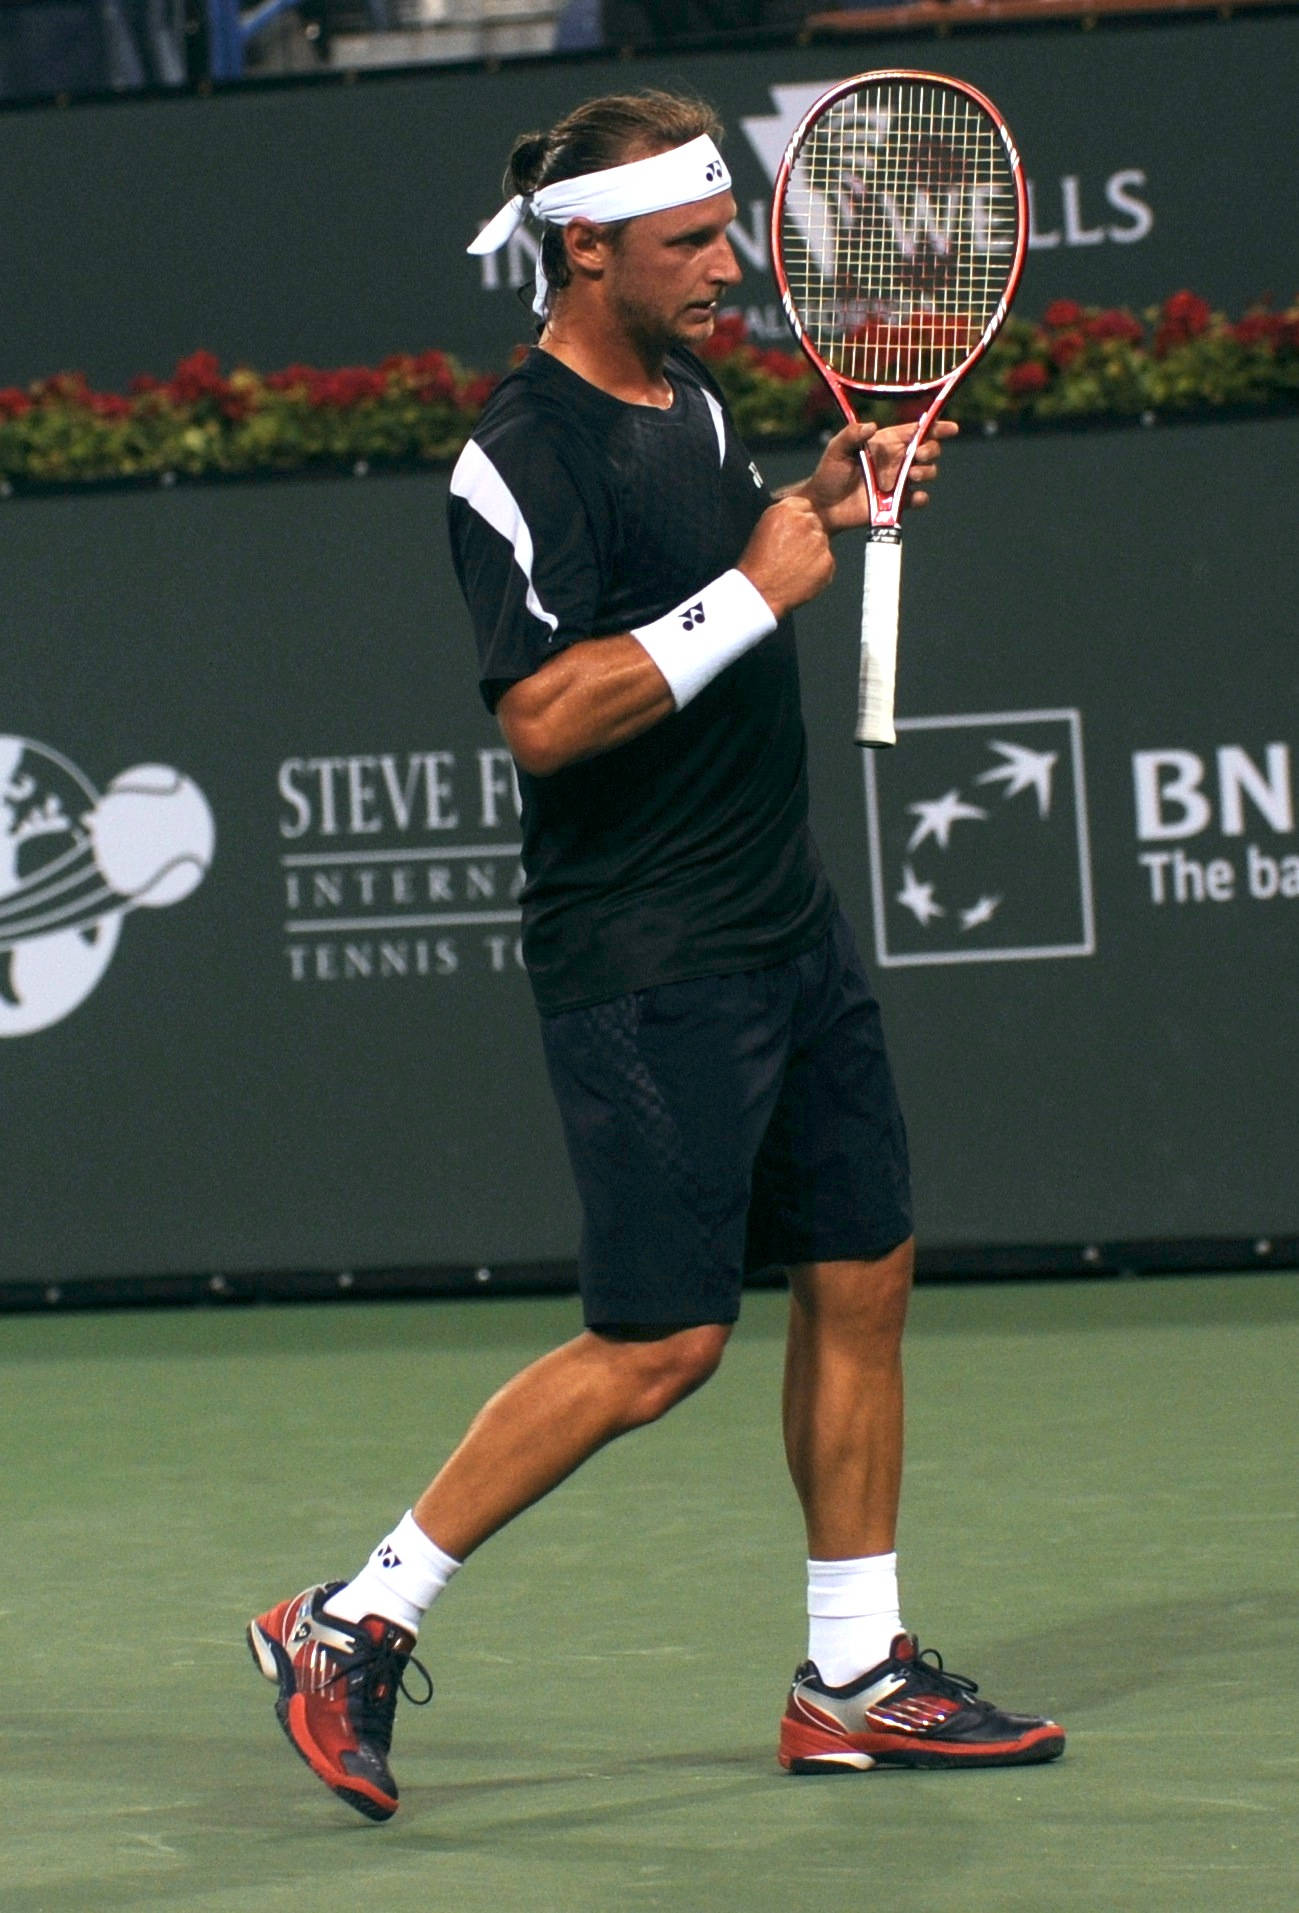 "David Nalbandian Wearing White Headband In Action"-A Snapshot from the Court Wallpaper